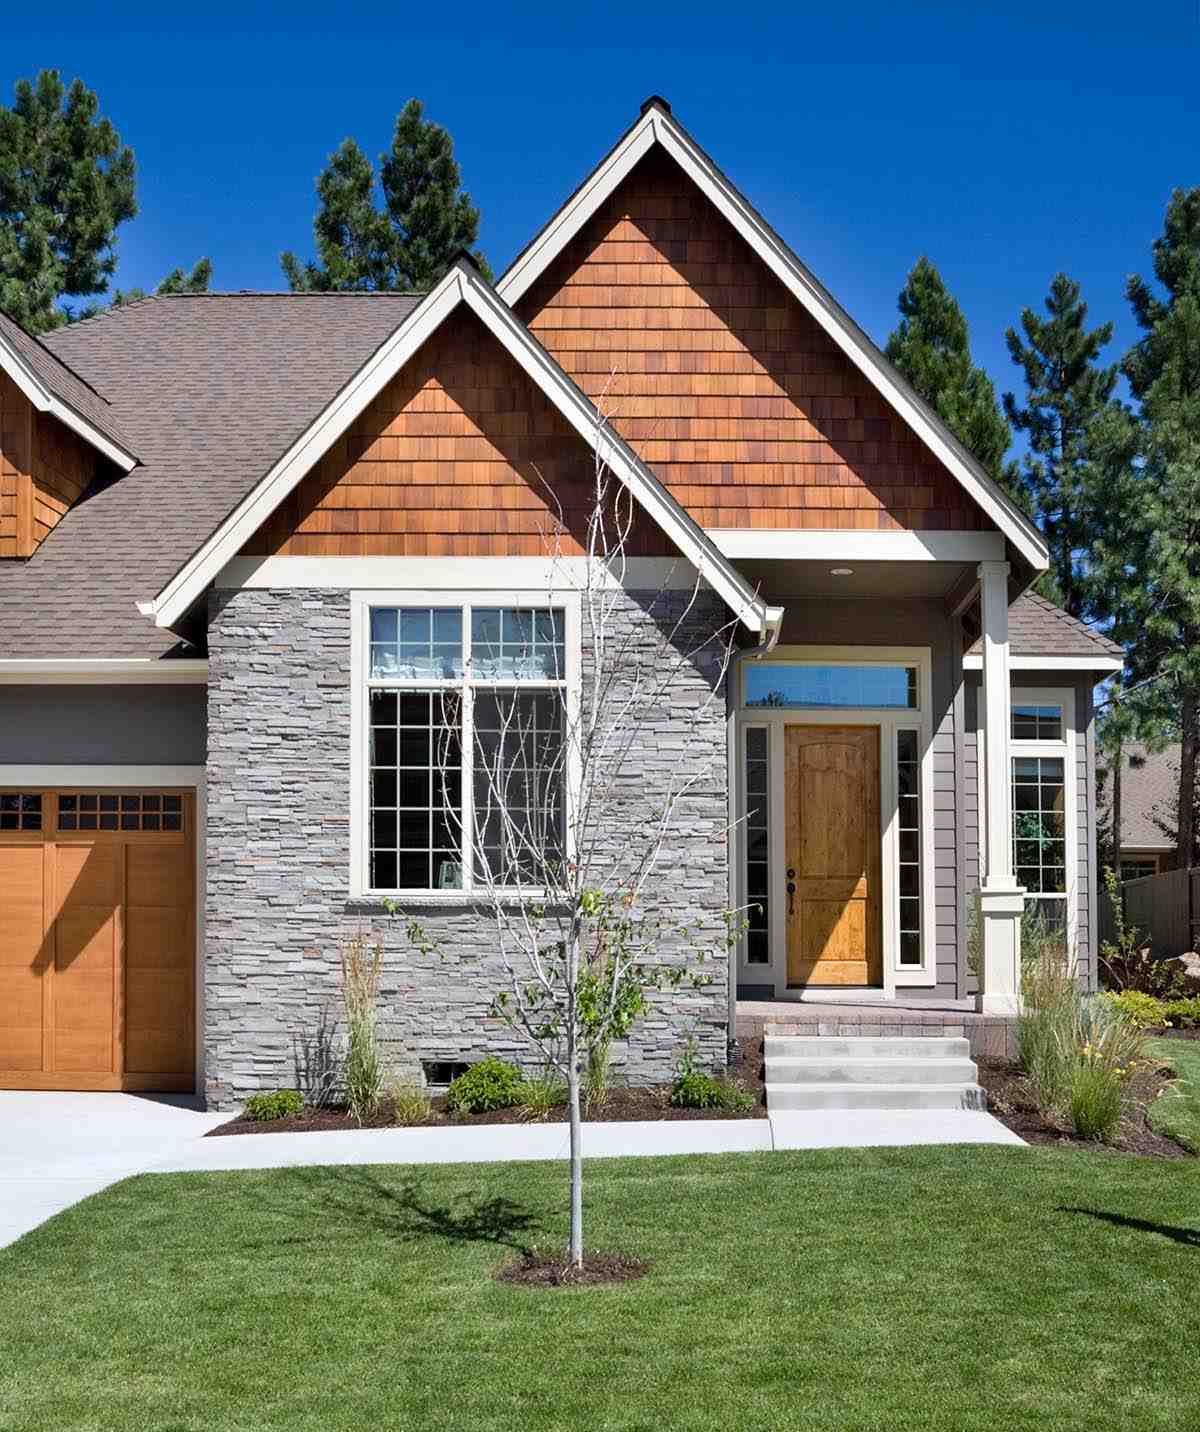 Craftsman, Traditional House Plan 81269 with 3 Beds, 3 Baths, 2 Car Garage Picture 1